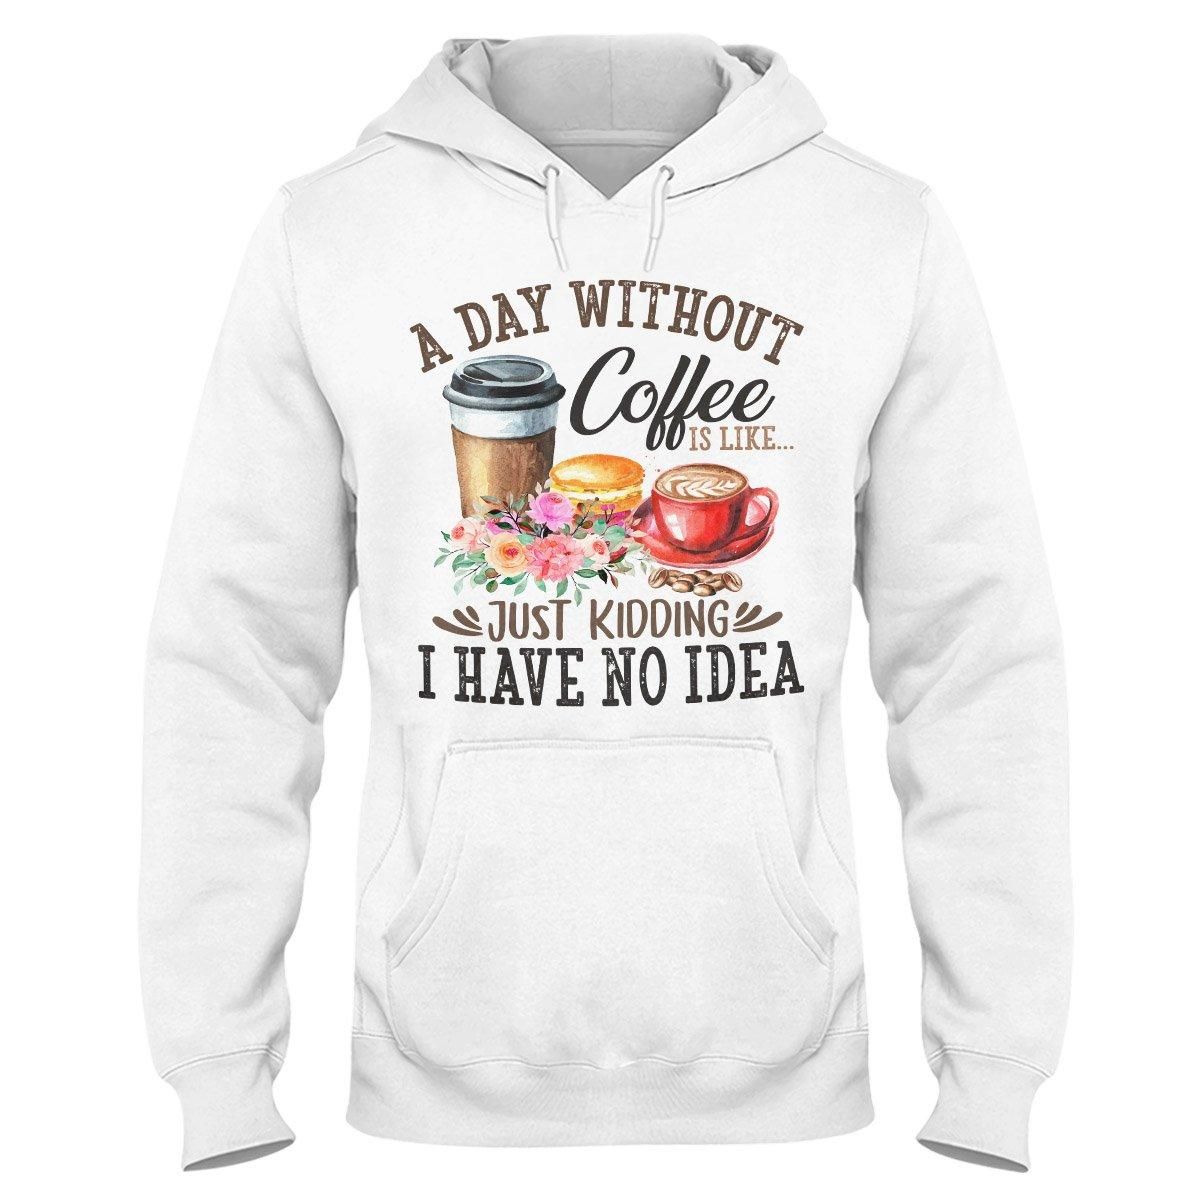 A Day Without Coffee EZ14 1509 Hoodie PAN